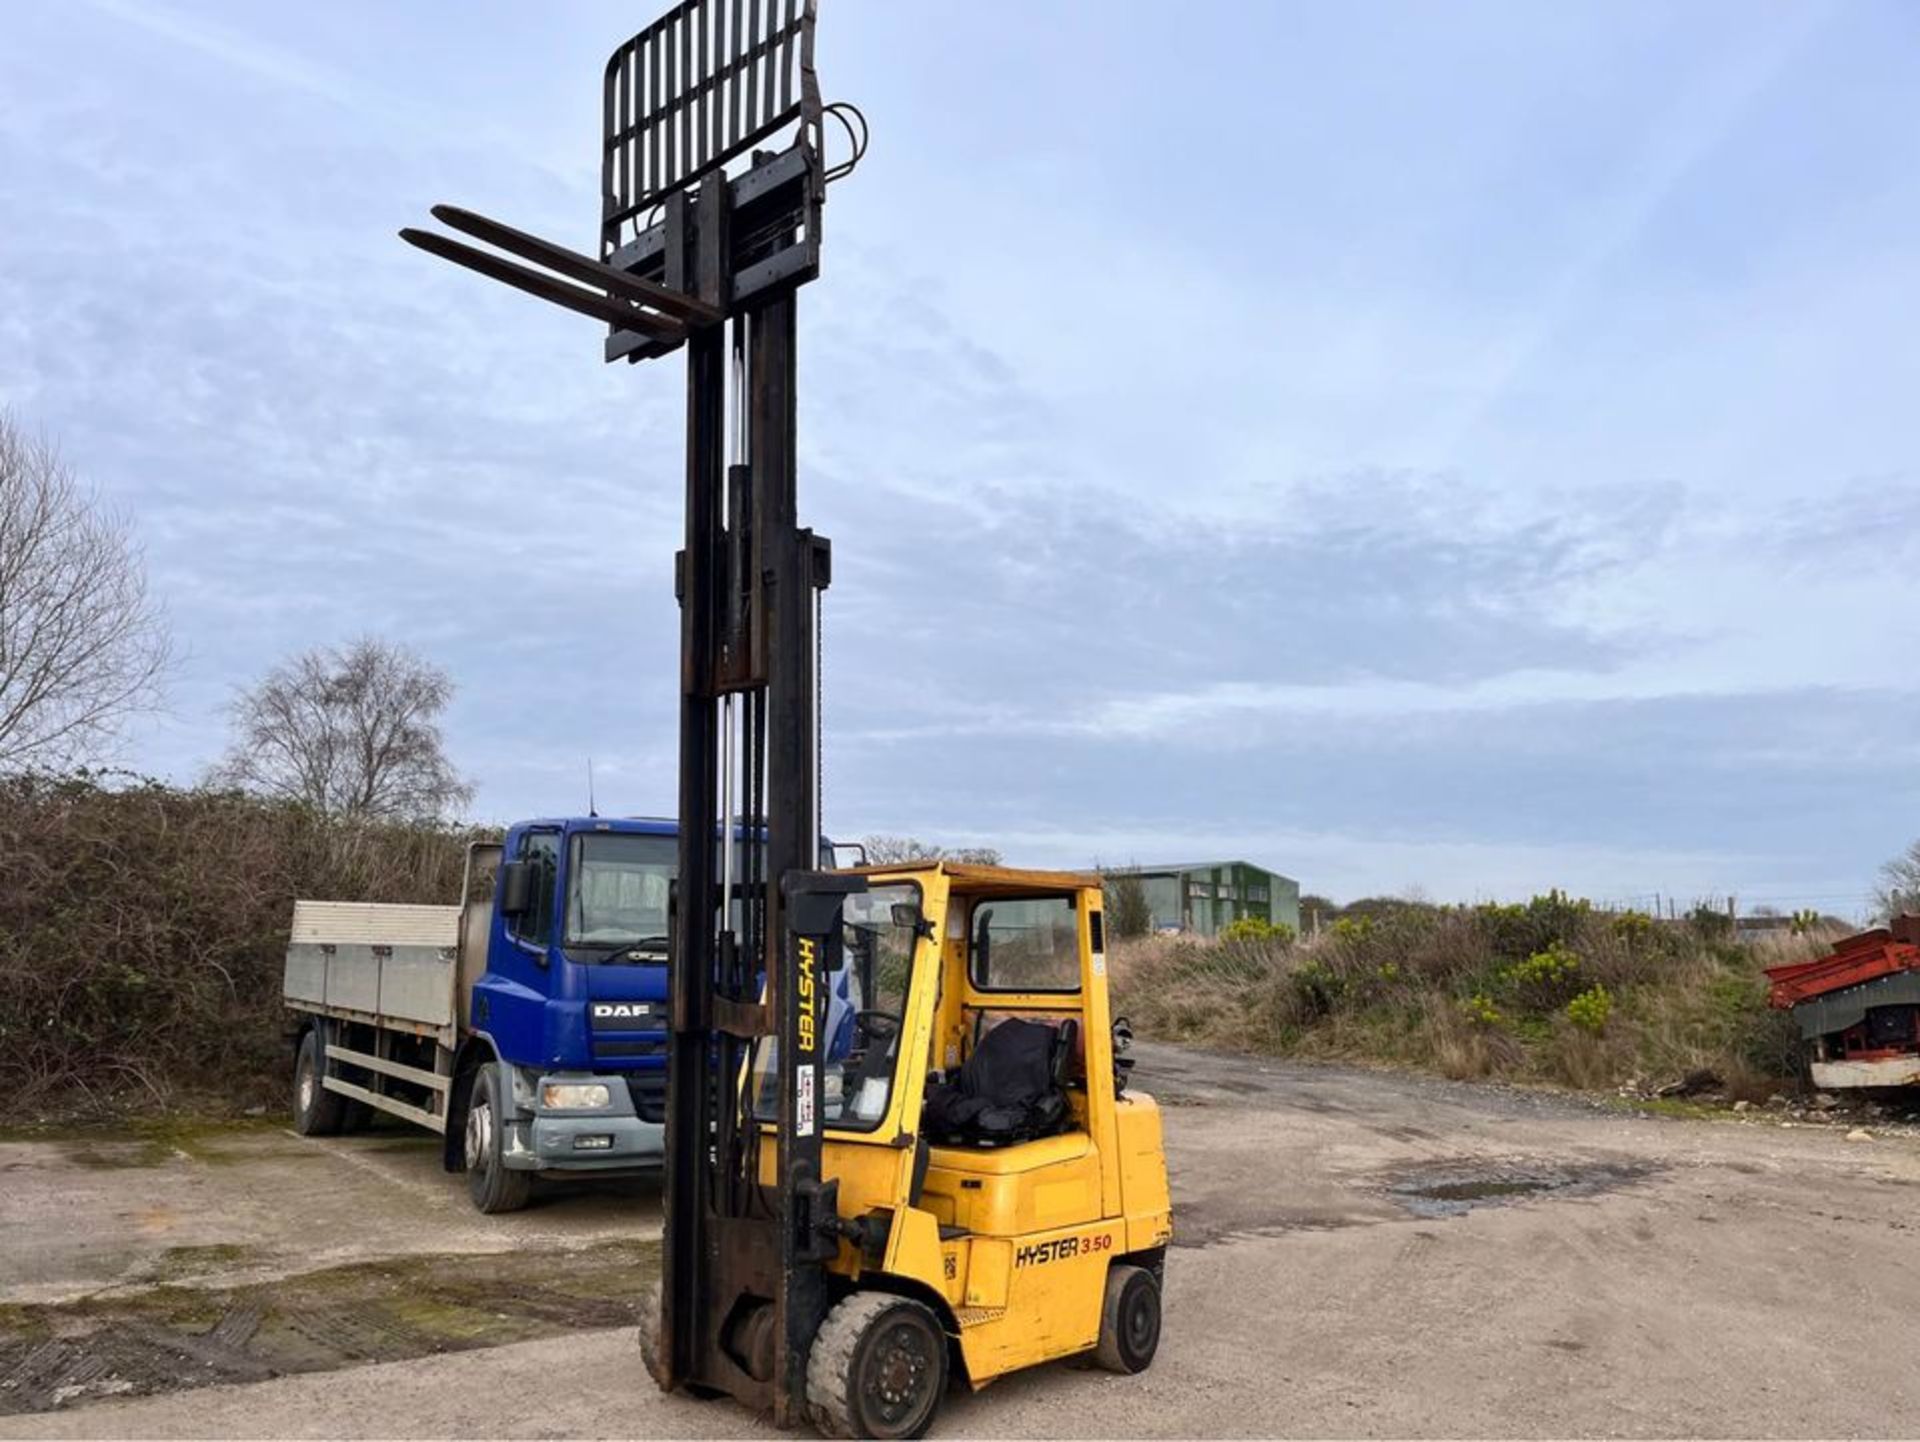 2006, HYSTER - 3.5 Ton Forklift - Image 2 of 16